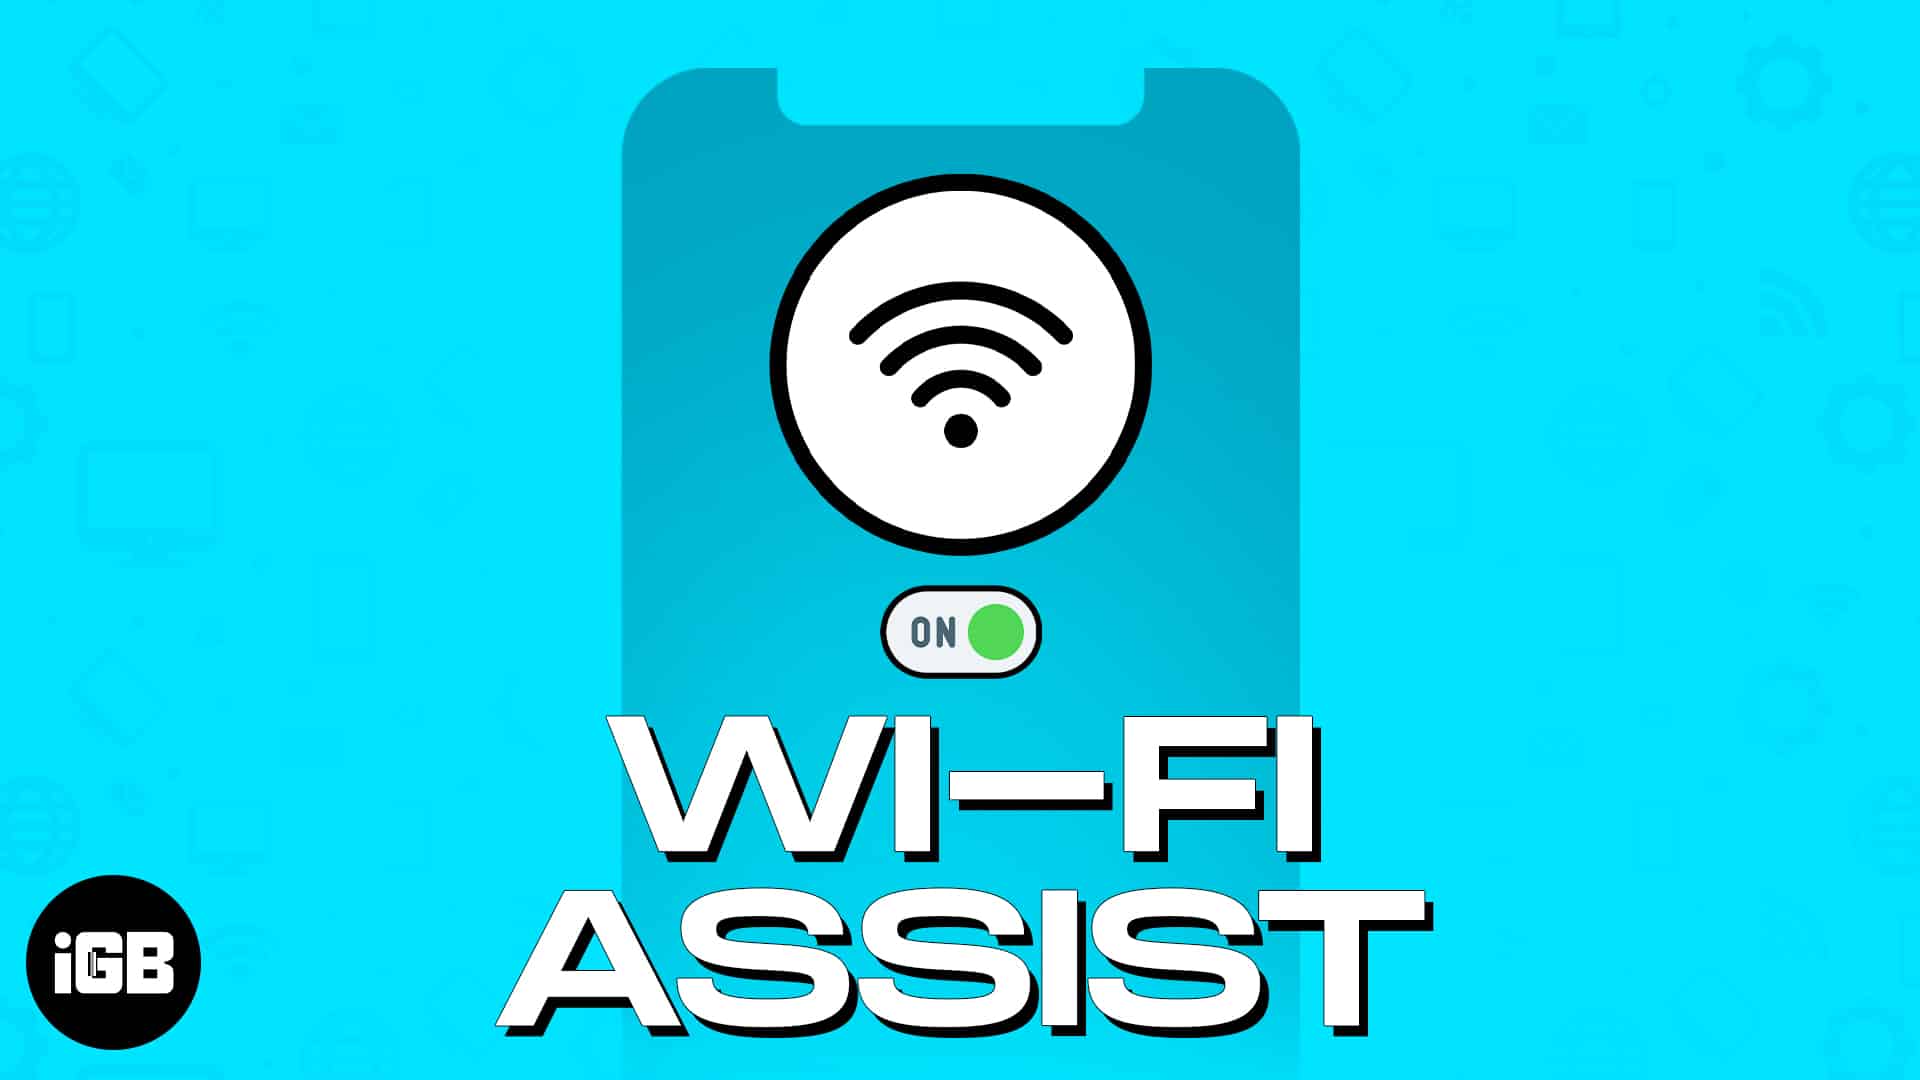 How to turn on Wi-Fi Assist on iPhone or iPad